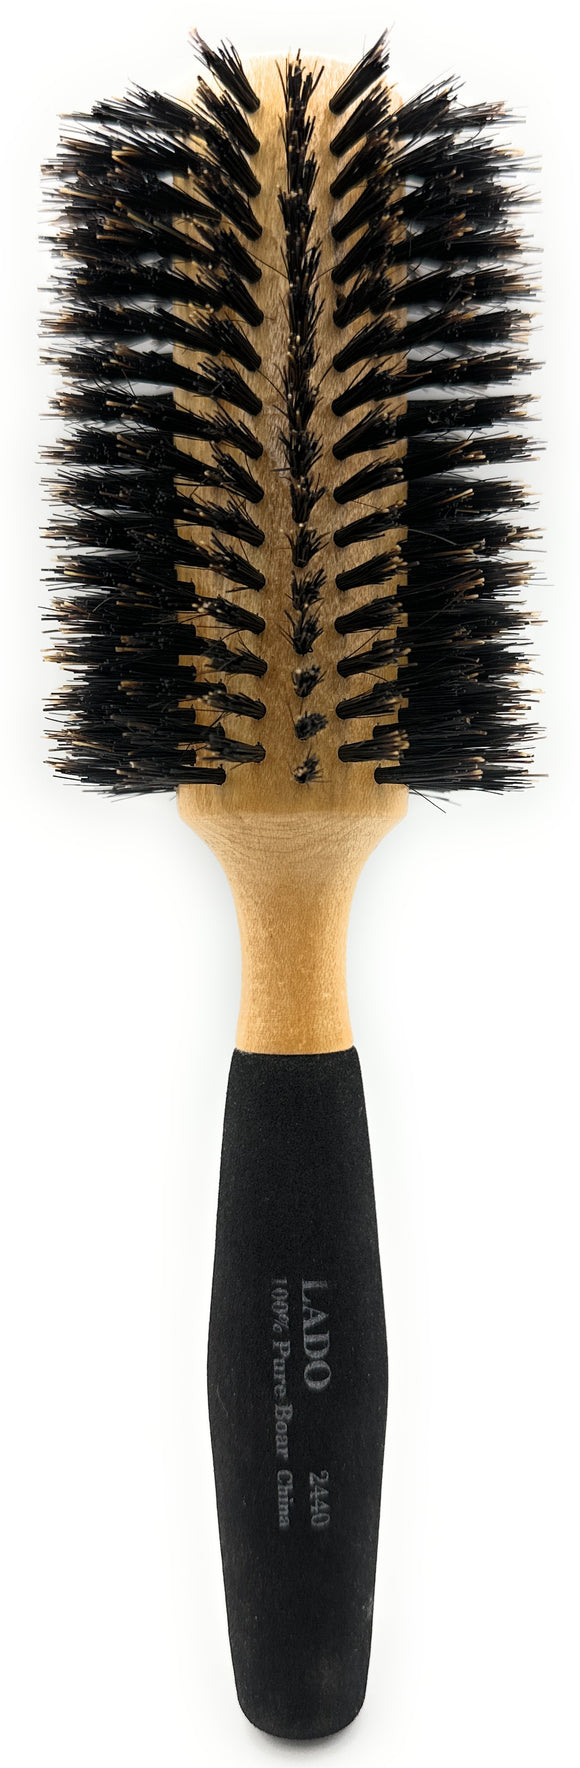 Round pure boar styling brush #2440 - 2 3/4